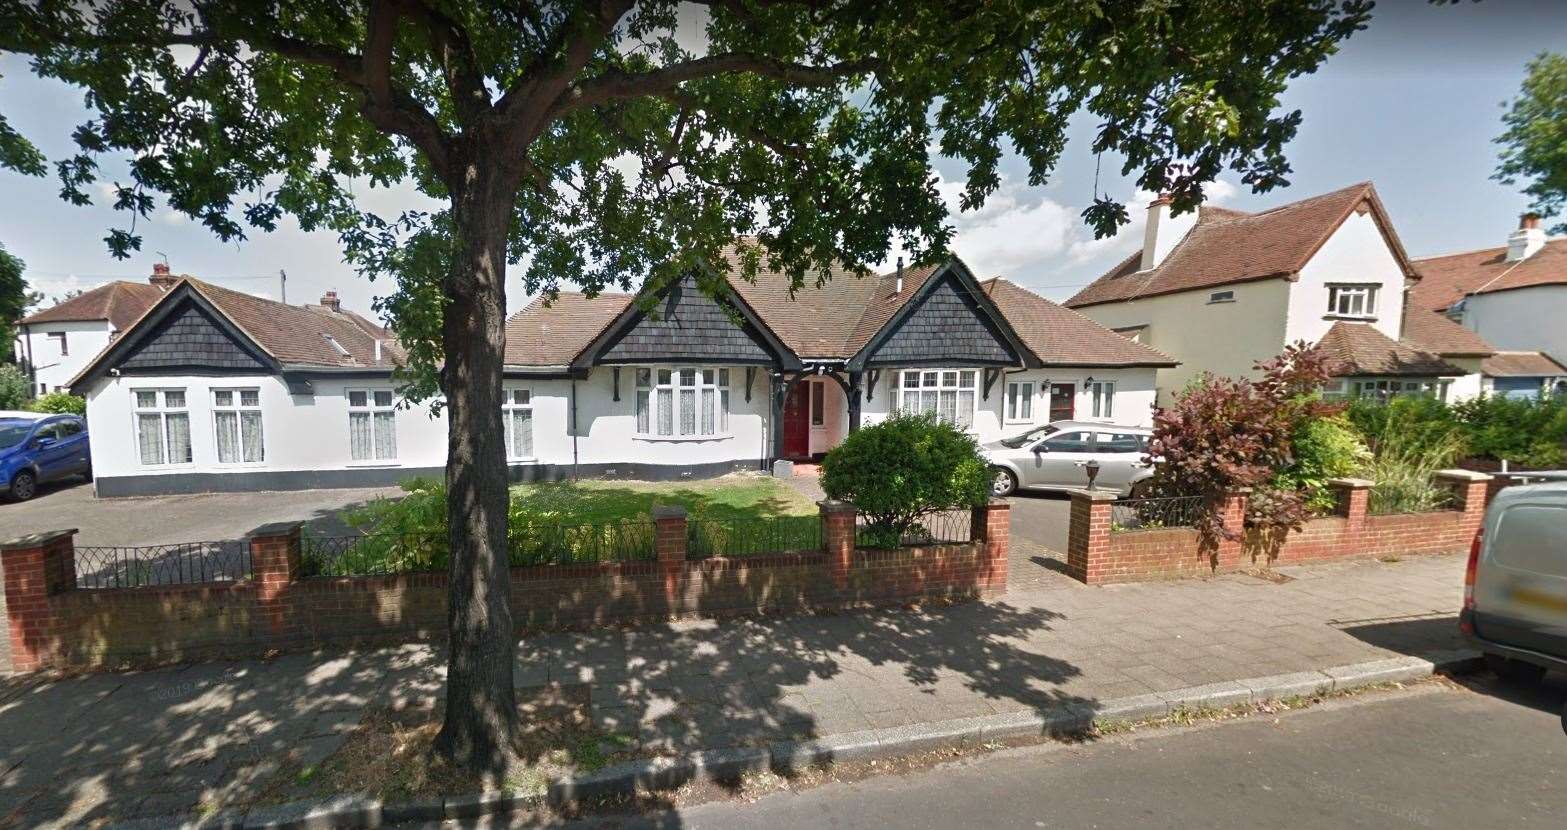 37 Spenser Road has also been placed in special measures. Picture: Google